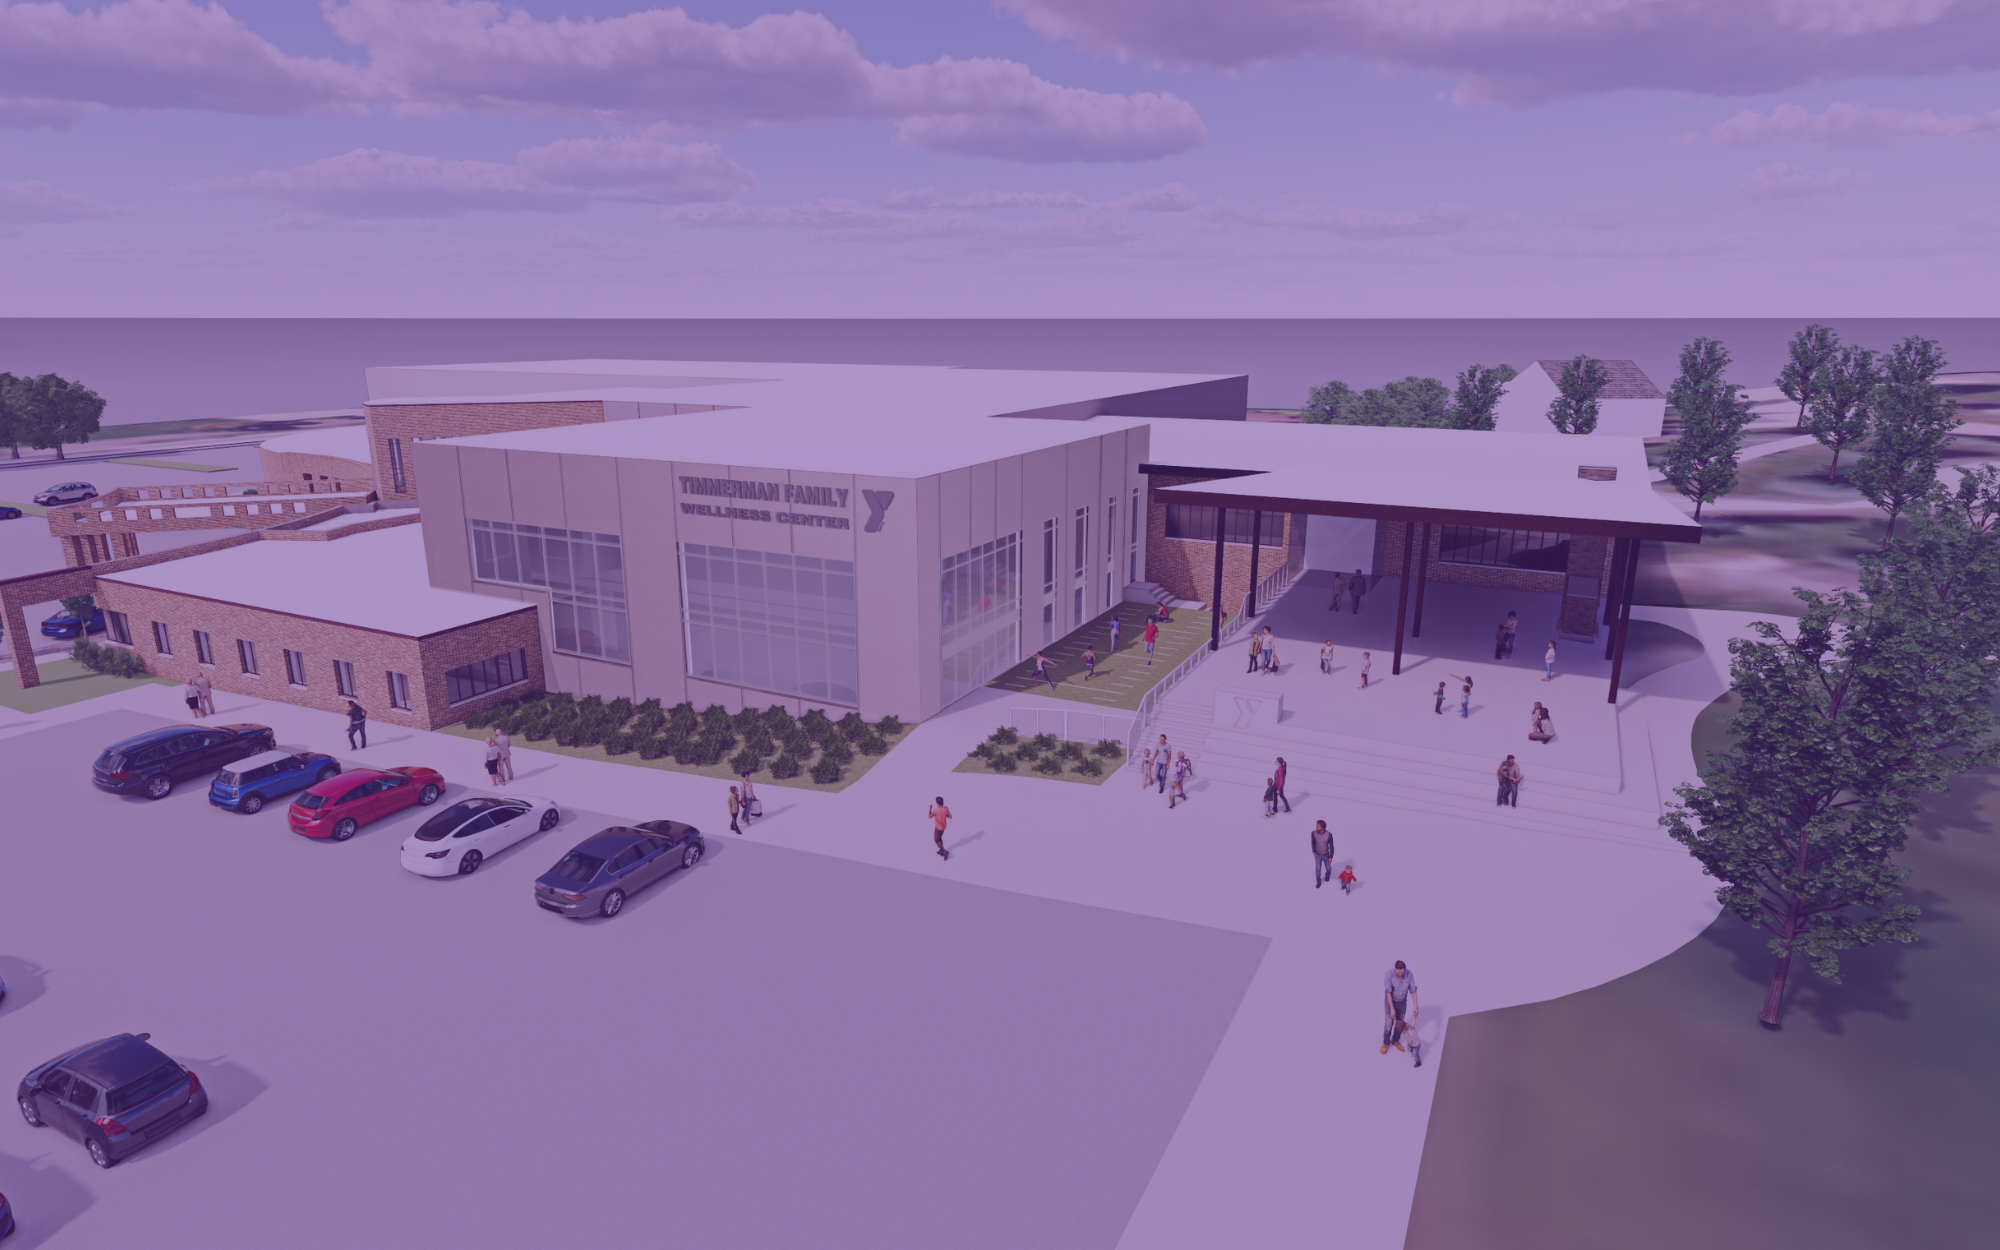 Artist rendering of the expanded Sturgeon Bay Center